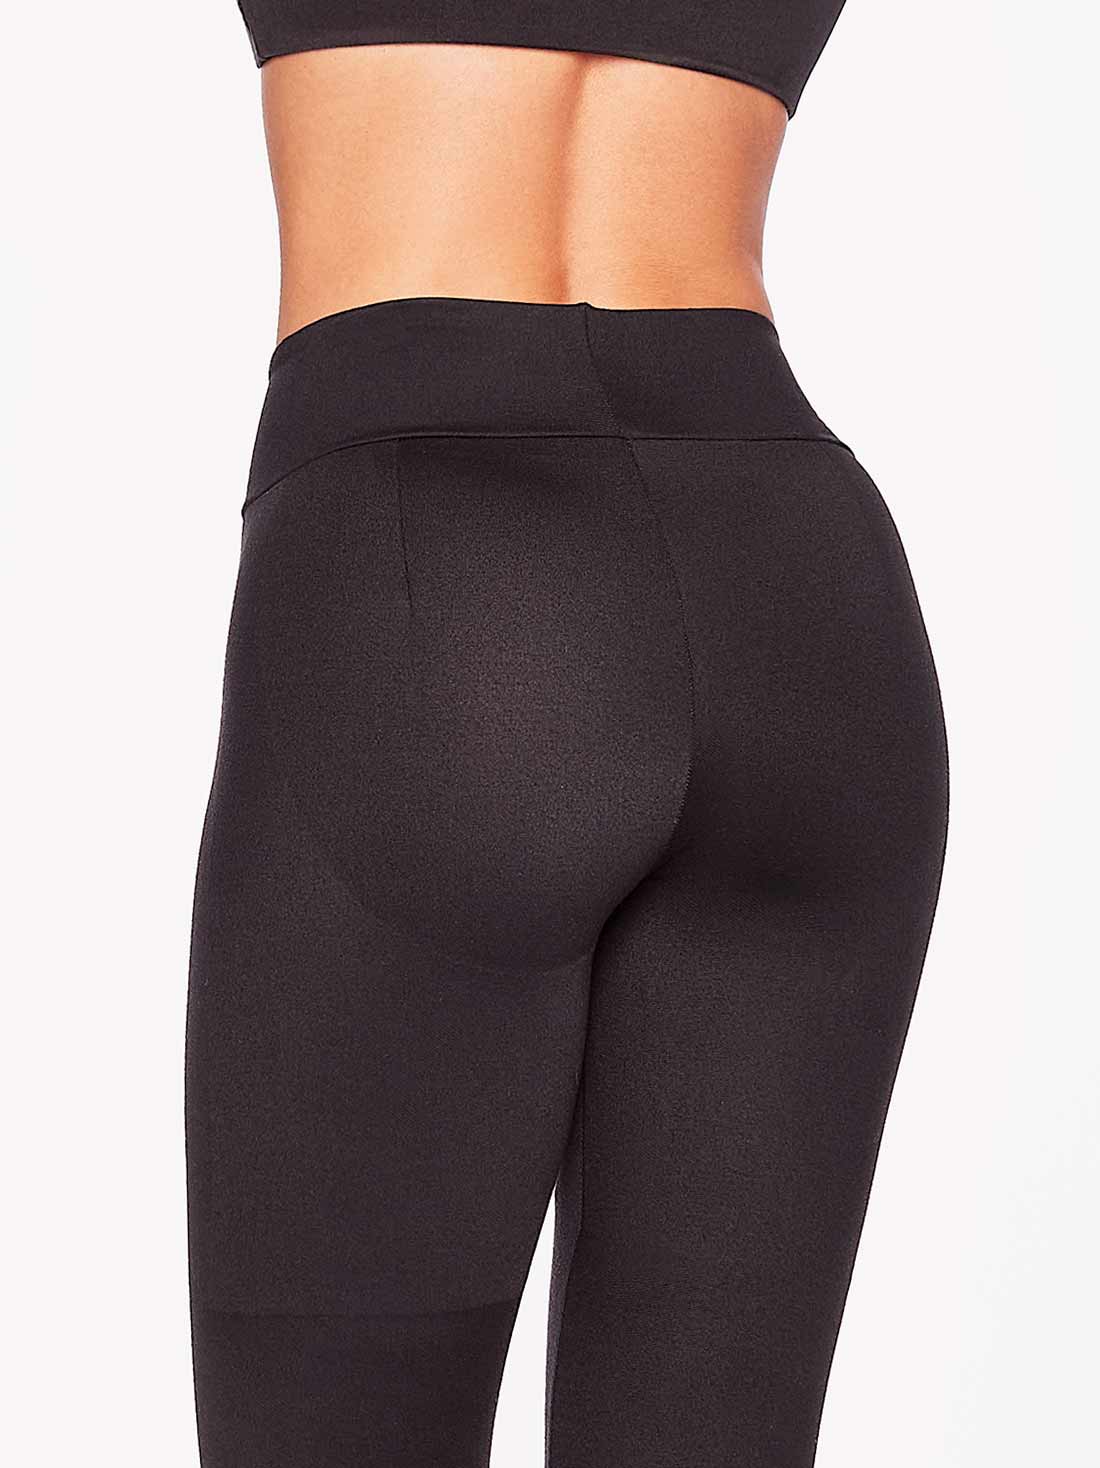 so butt lifting leggings are a thing now?? use my code anju77 @shopcos, Leggings